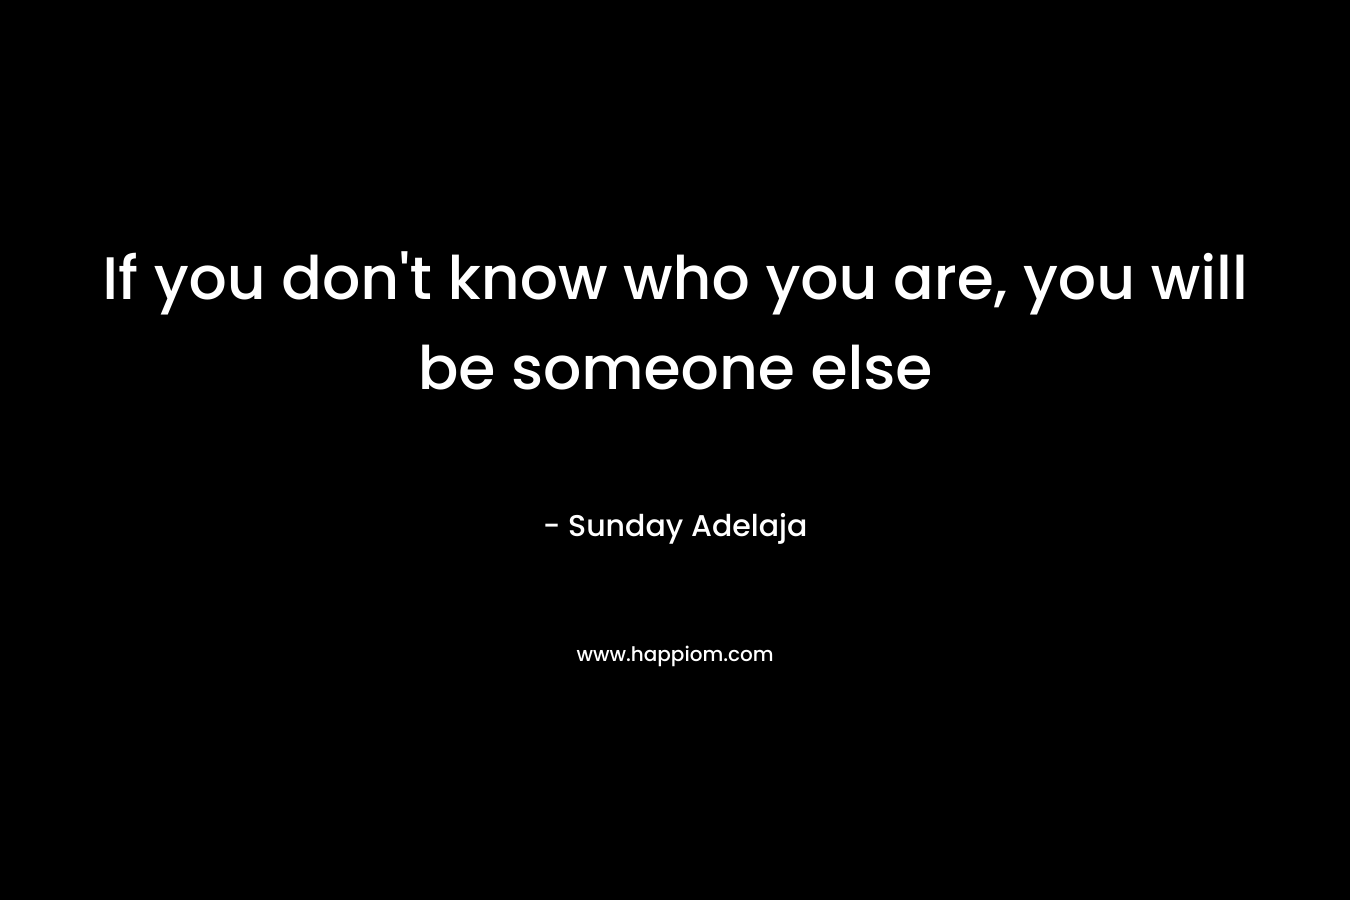 If you don't know who you are, you will be someone else